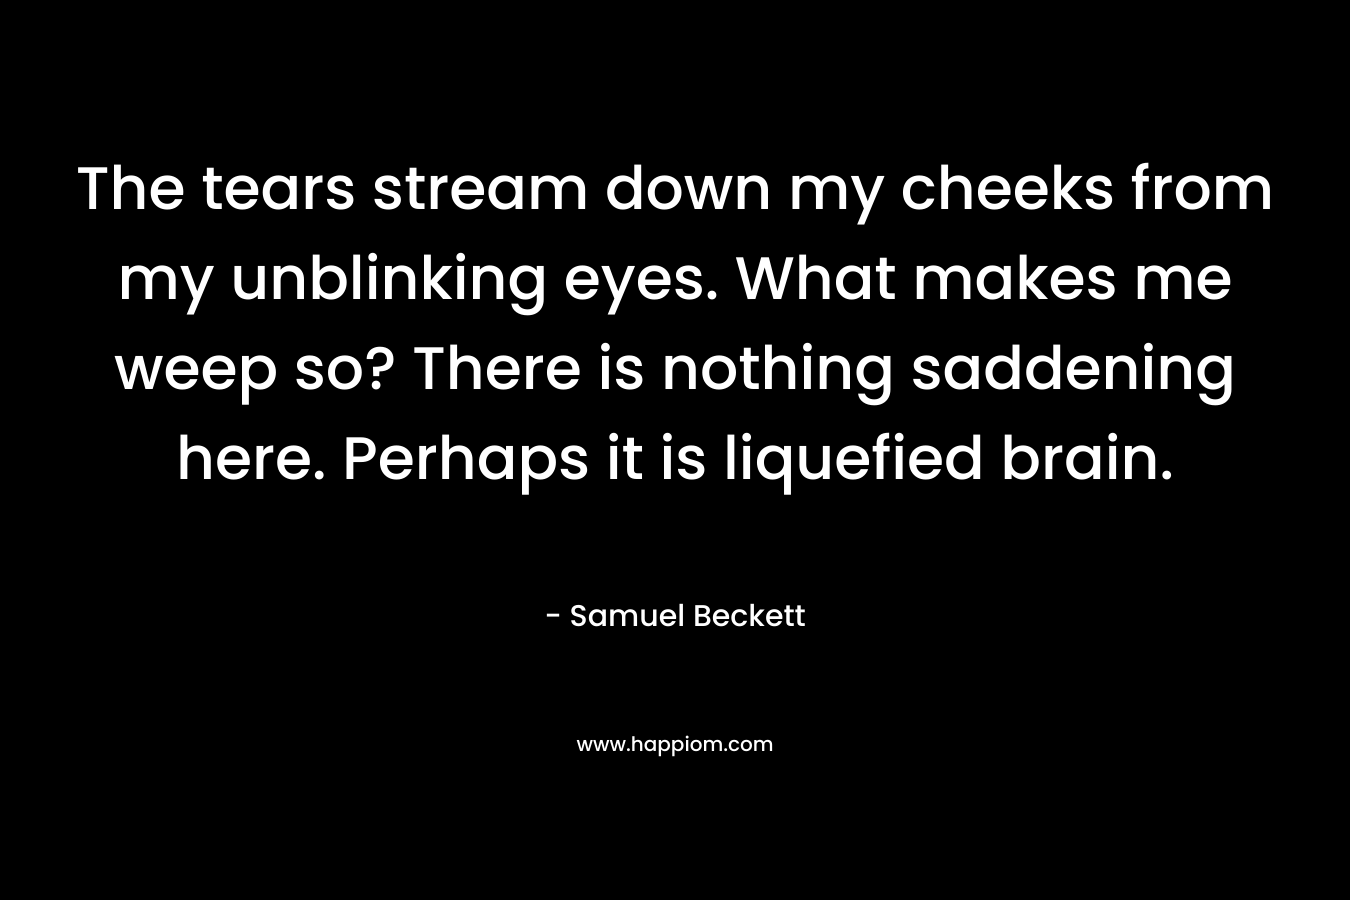 The tears stream down my cheeks from my unblinking eyes. What makes me weep so? There is nothing saddening here. Perhaps it is liquefied brain. – Samuel Beckett